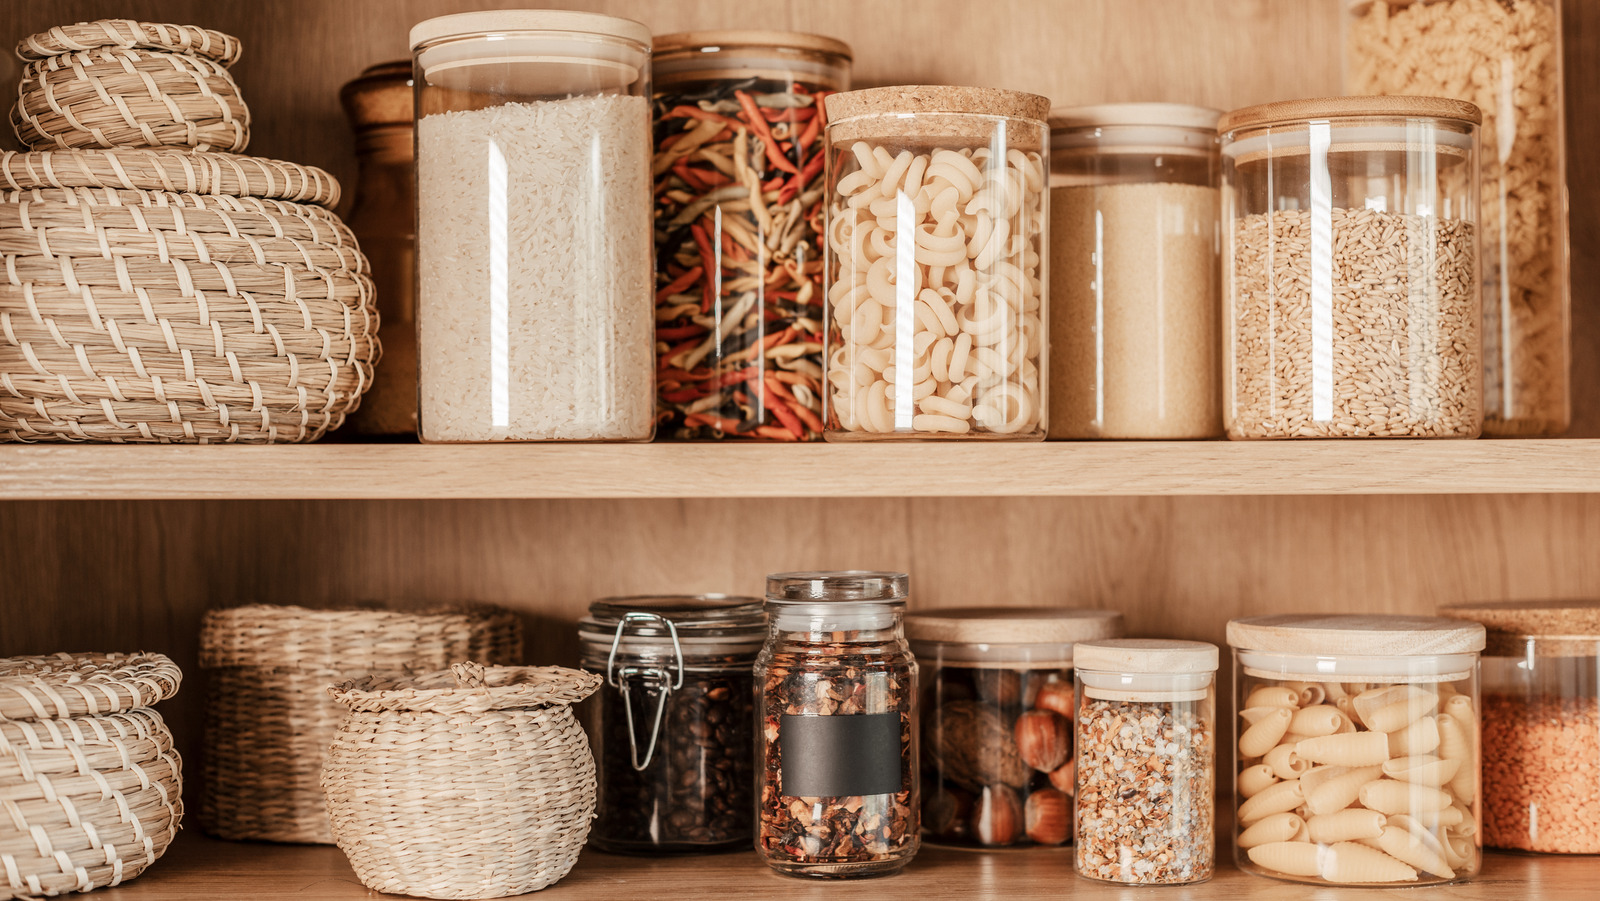 https://www.housedigest.com/img/gallery/3-clever-ideas-for-building-a-pantry-for-extra-kitchen-storage/l-intro-1659248401.jpg